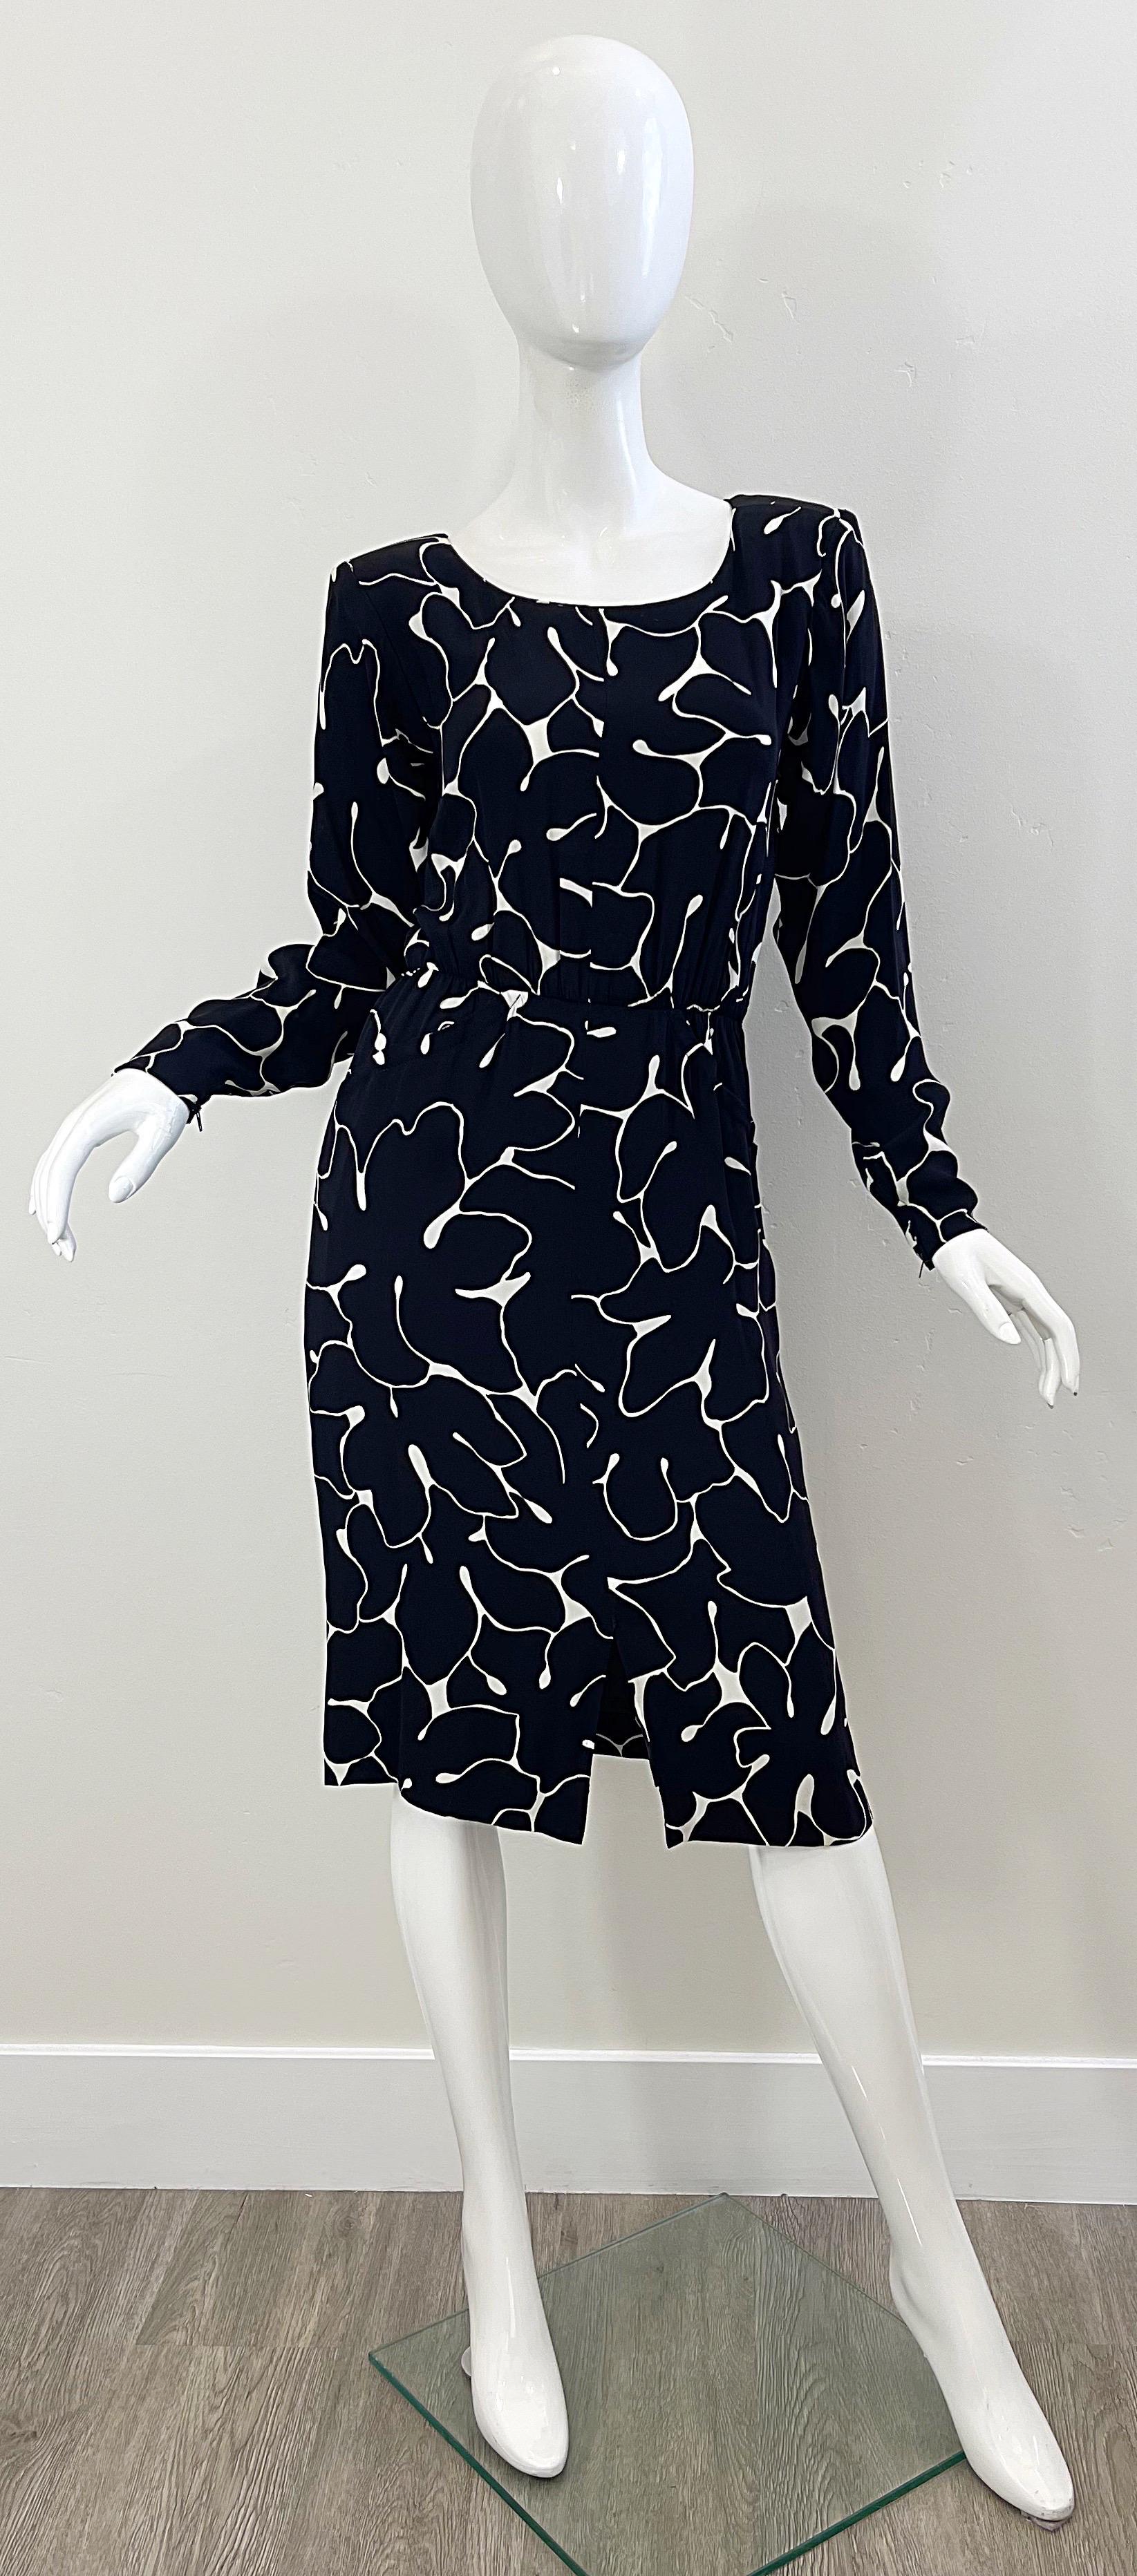 Yves Saint Laurent 1980s Black and White Abstract Flower Print Silk Crepe Dress In Excellent Condition For Sale In San Diego, CA